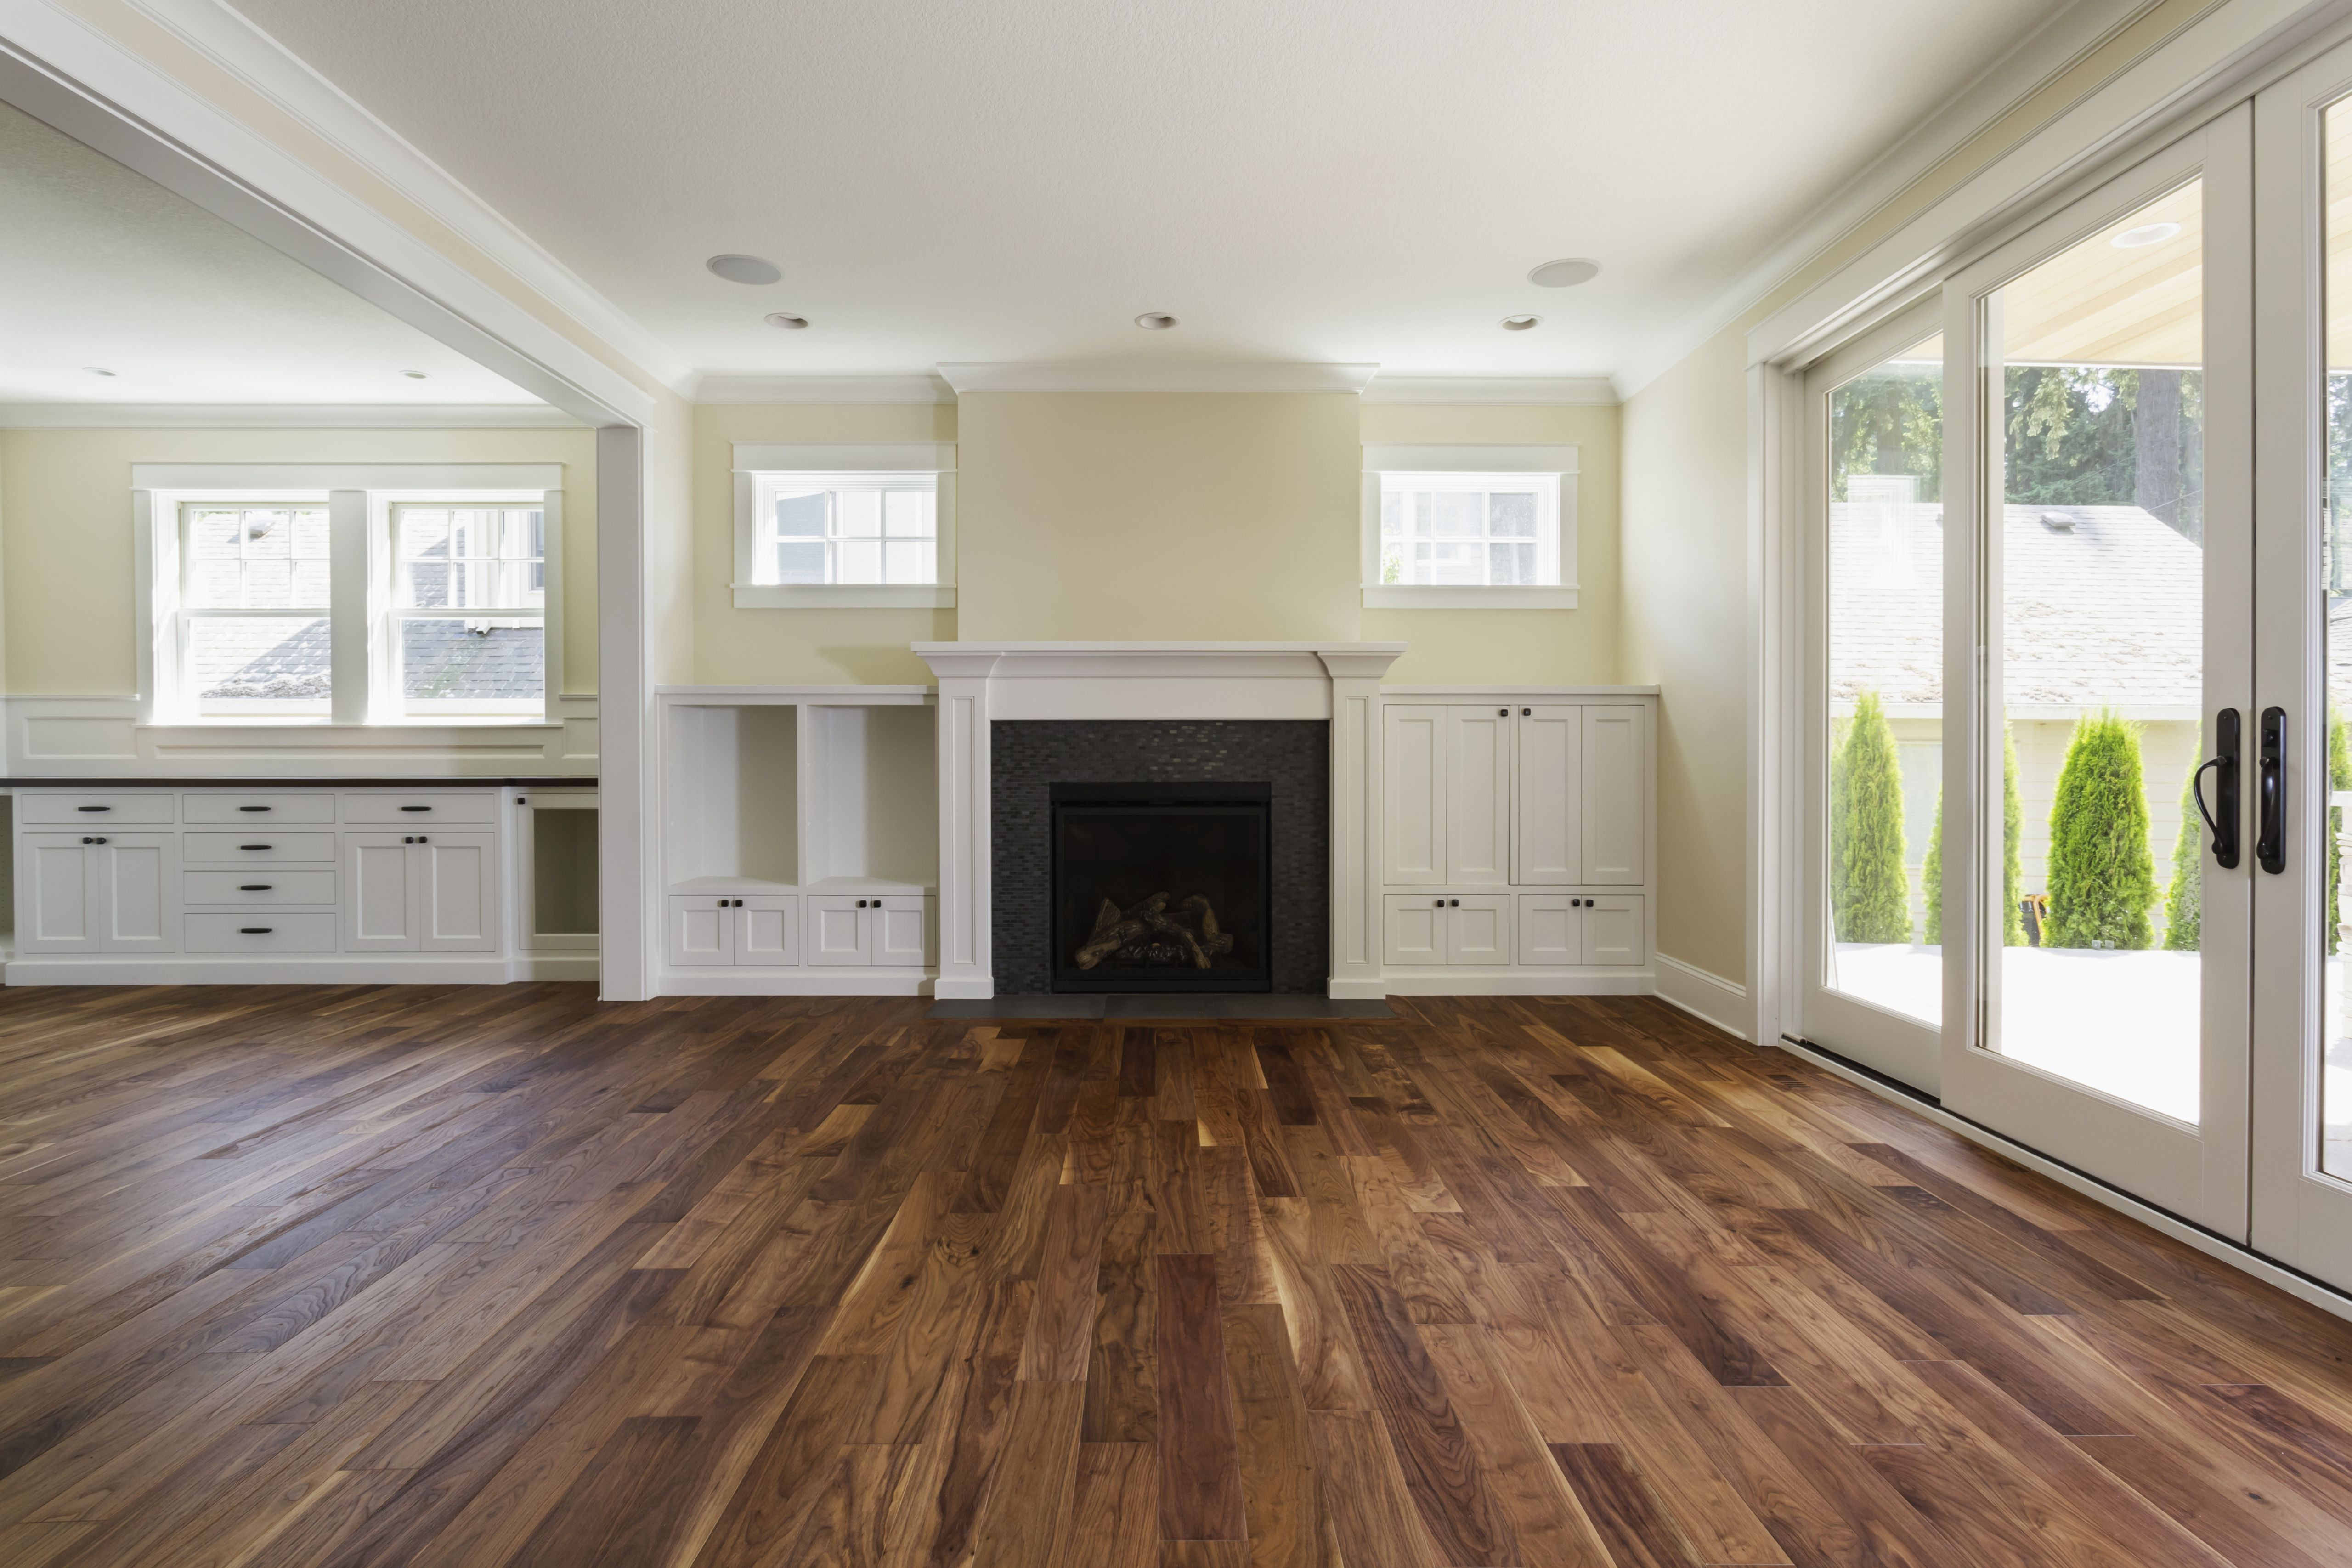 21 Cute Wide Plank Vs Narrow Plank Hardwood Flooring 2024 free download wide plank vs narrow plank hardwood flooring of the pros and cons of prefinished hardwood flooring with fireplace and built in shelves in living room 482143011 57bef8e33df78cc16e035397